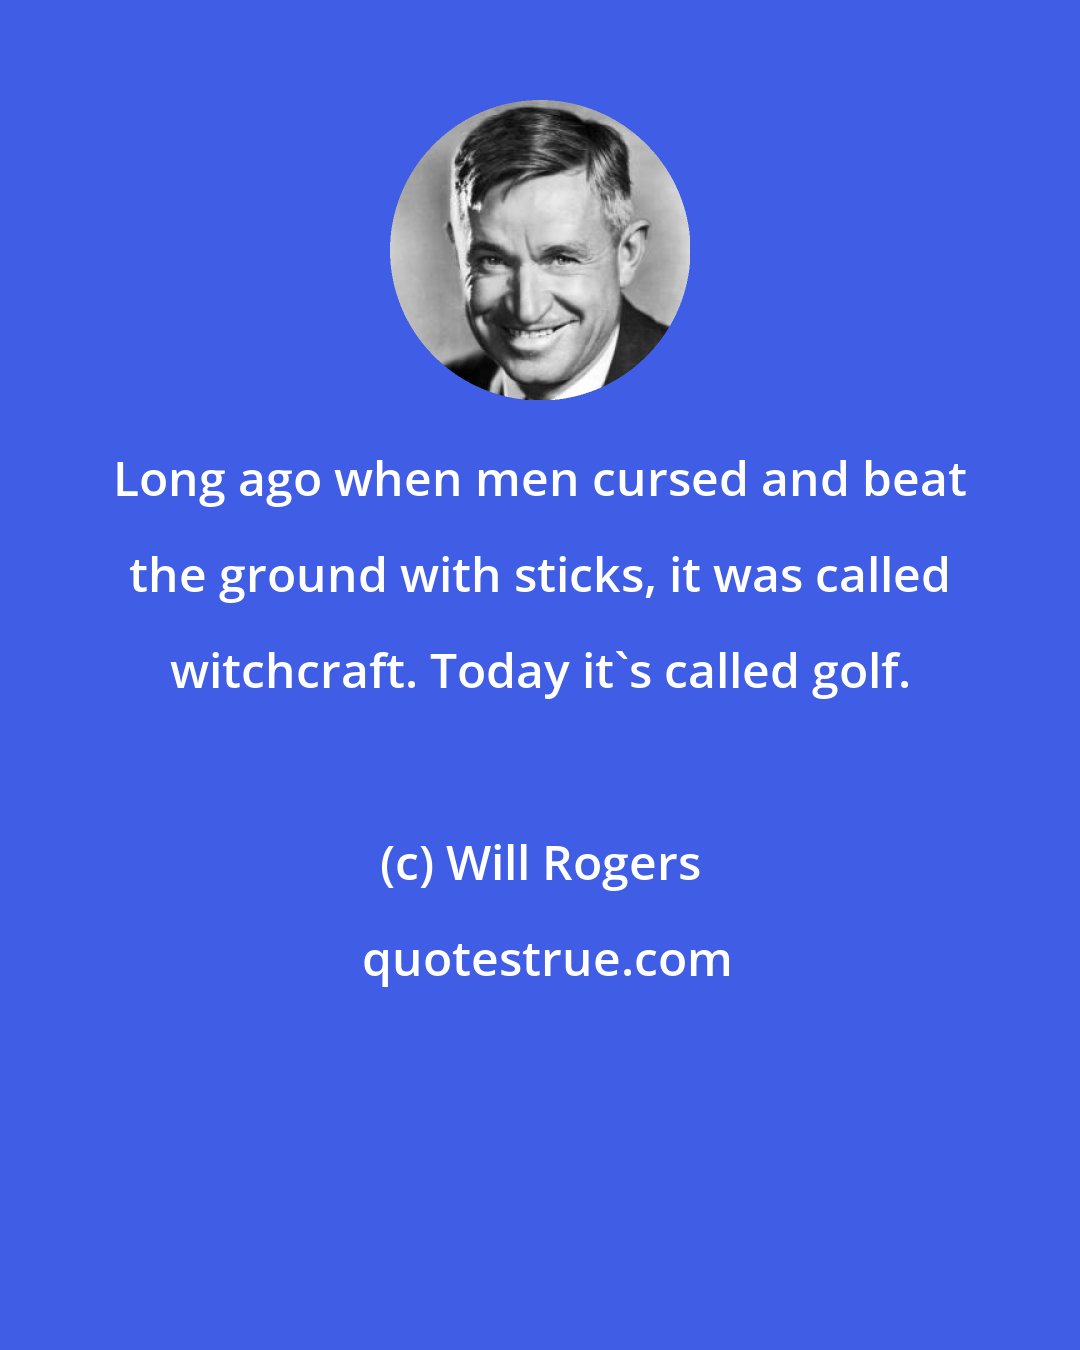 Will Rogers: Long ago when men cursed and beat the ground with sticks, it was called witchcraft. Today it's called golf.